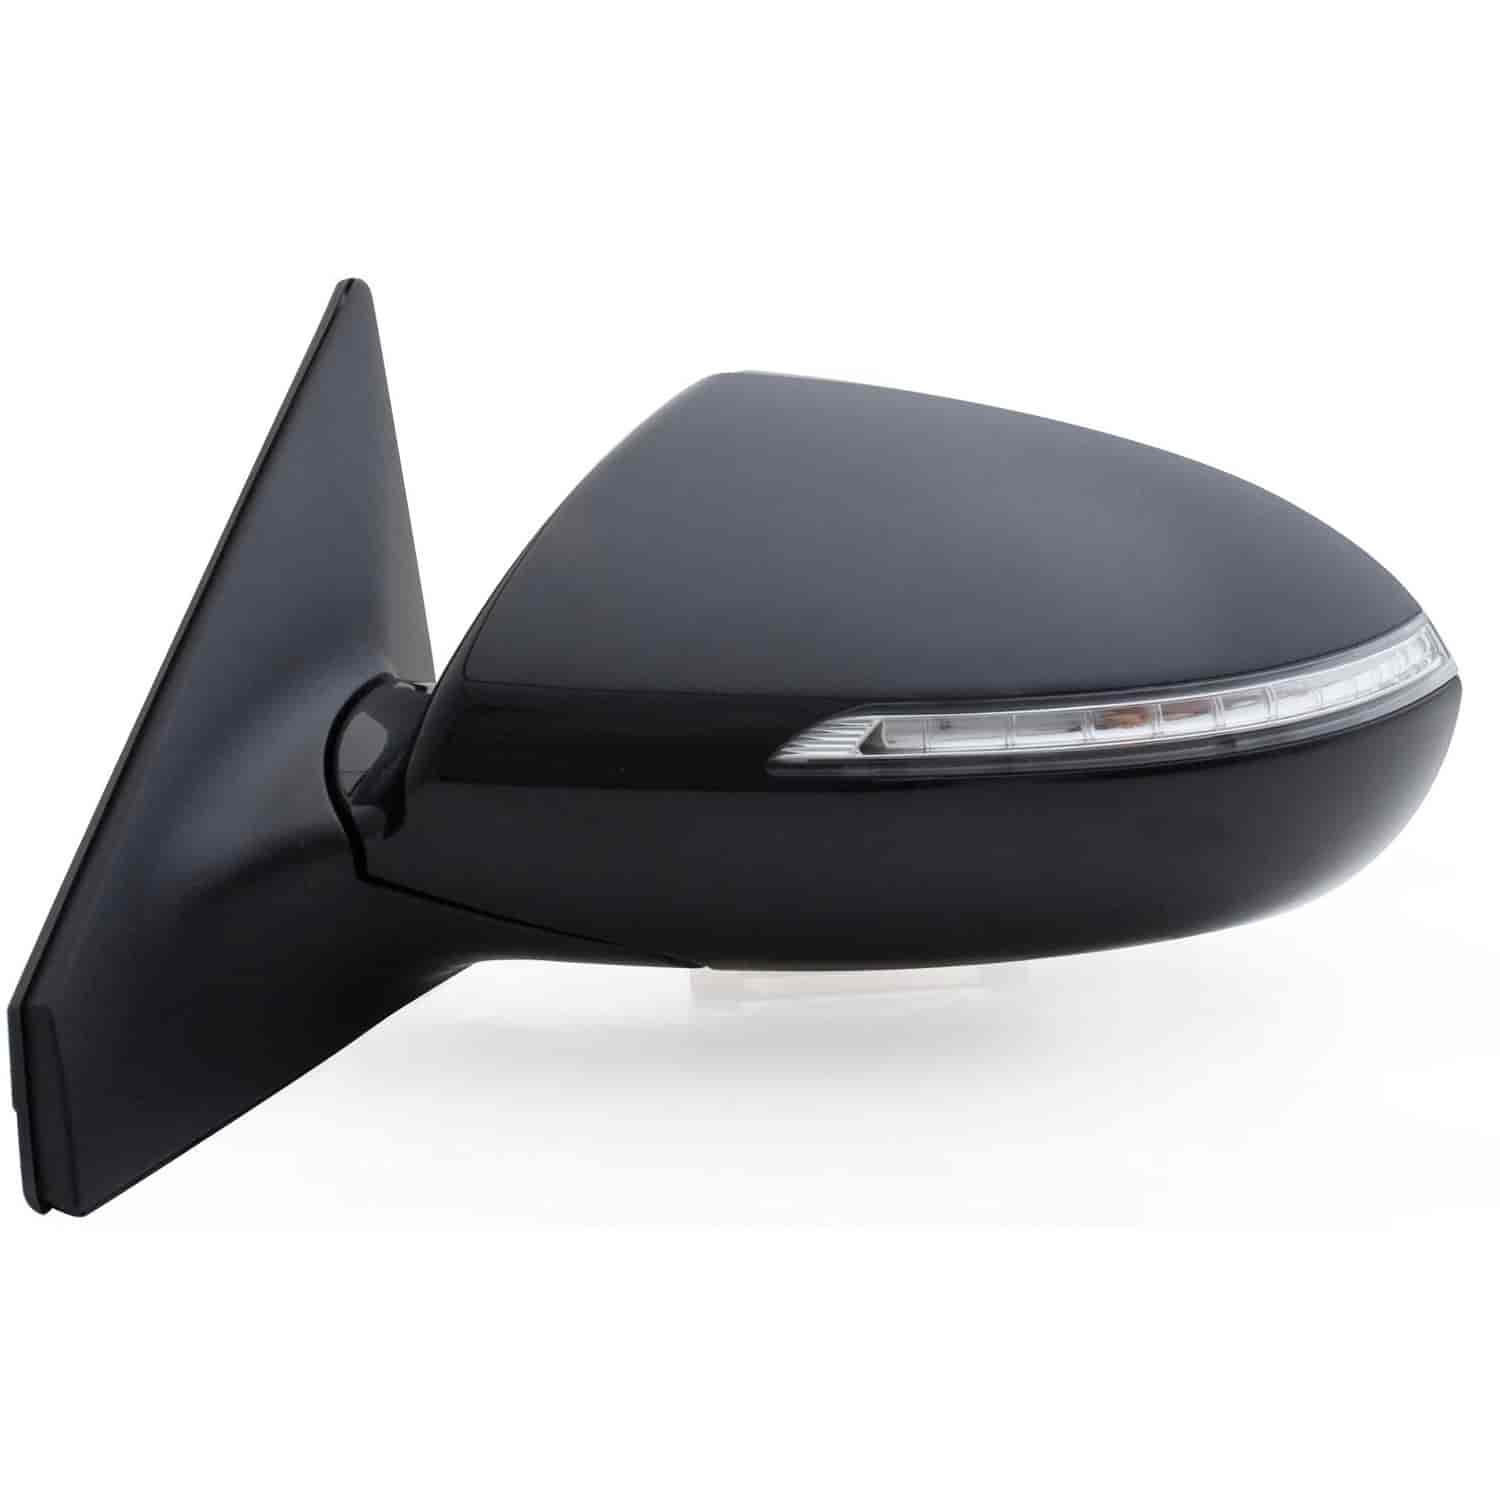 OEM Style Replacement mirror for 11-14 Kia Sportage w/turn signal driver side mirror tested to fit a